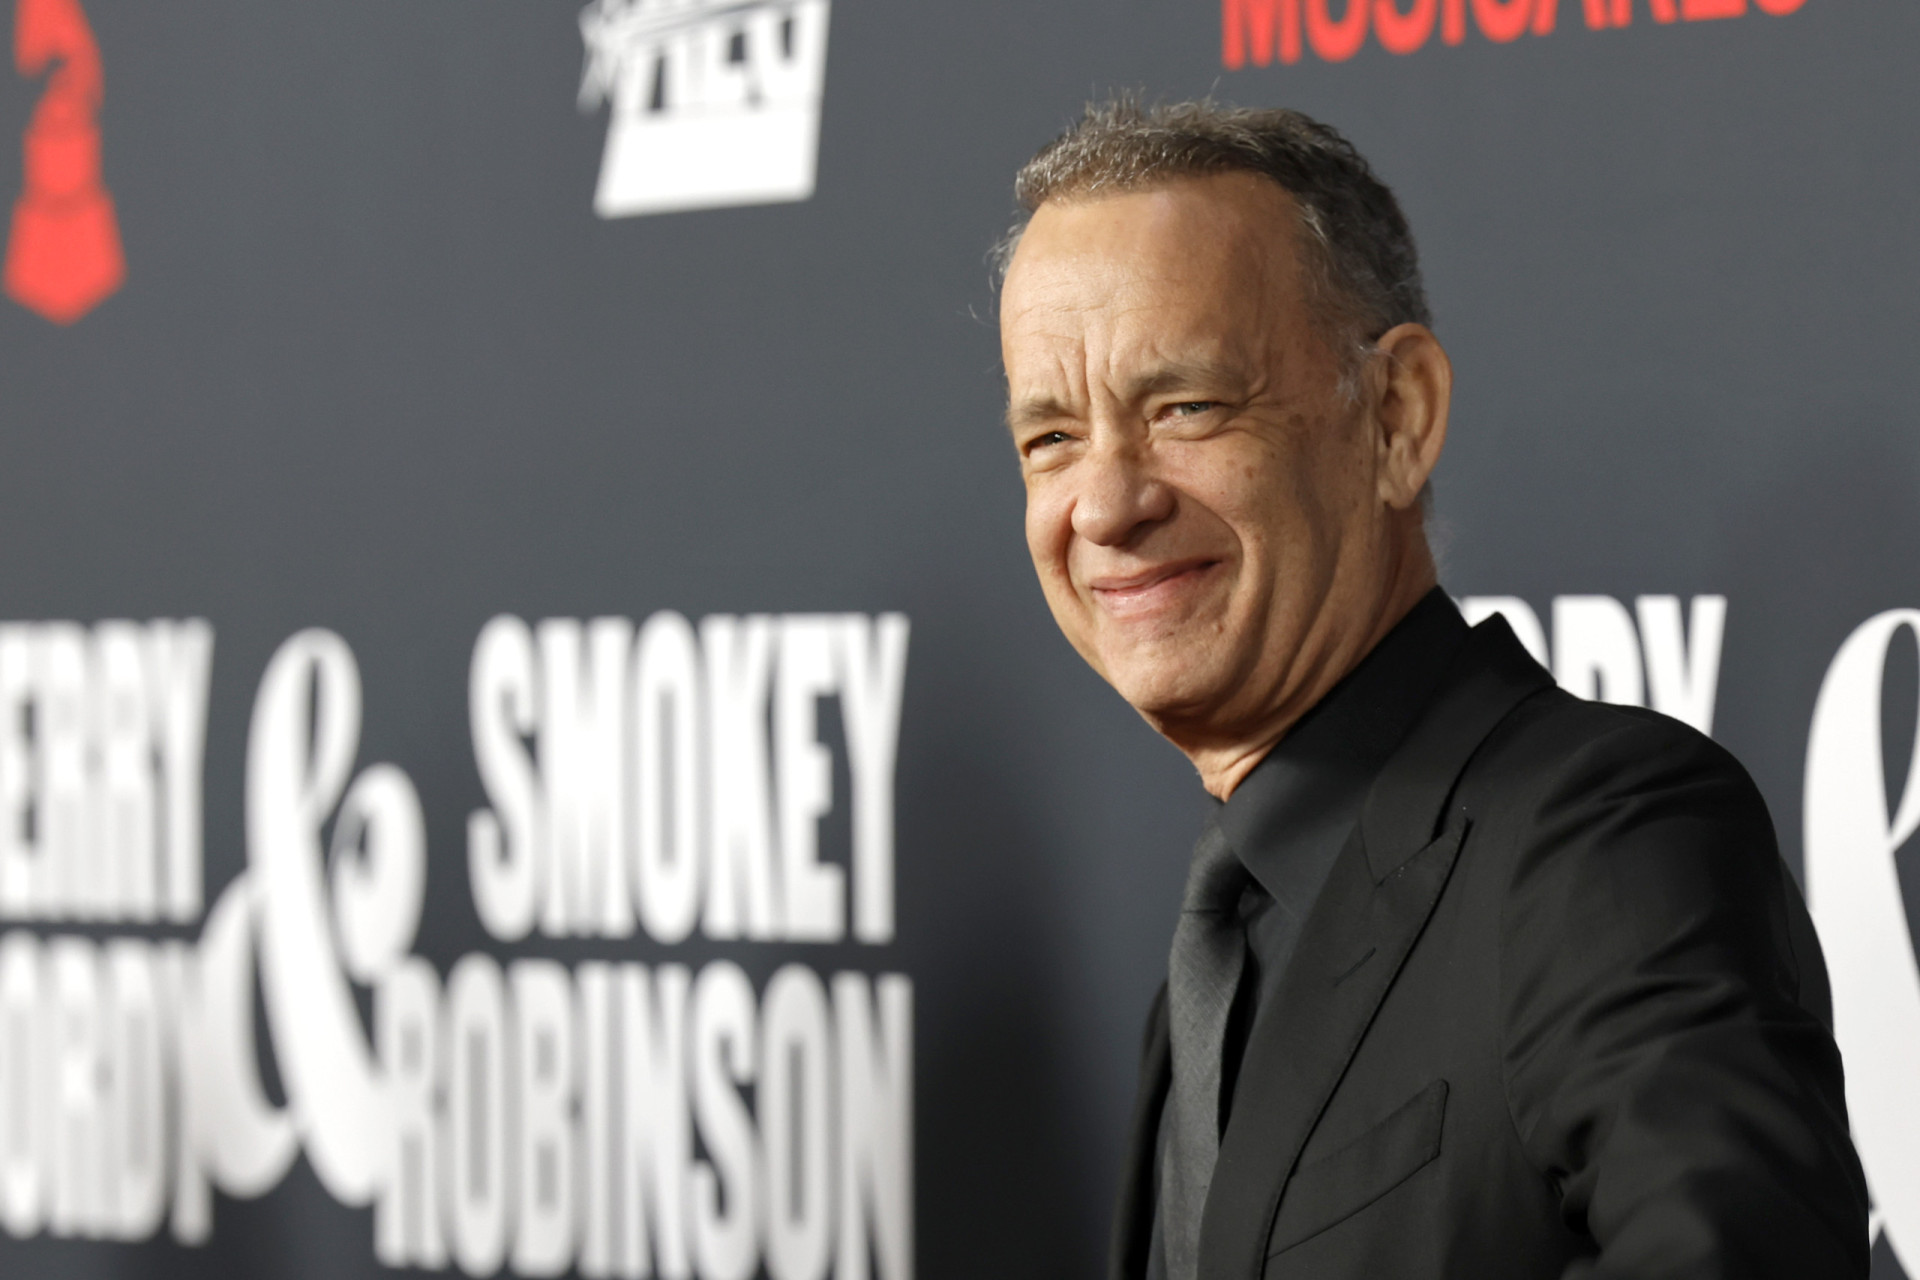 <p>Born under the nurturing sign of Cancer, Tom Hanks' tarot journey showcases his enduring warmth and talent.</p><p><a href="https://www.msn.com/en-us/community/channel/vid-7xx8mnucu55yw63we9va2gwr7uihbxwc68fxqp25x6tg4ftibpra?cvid=94631541bc0f4f89bfd59158d696ad7e">Follow us and access great exclusive content every day</a></p>